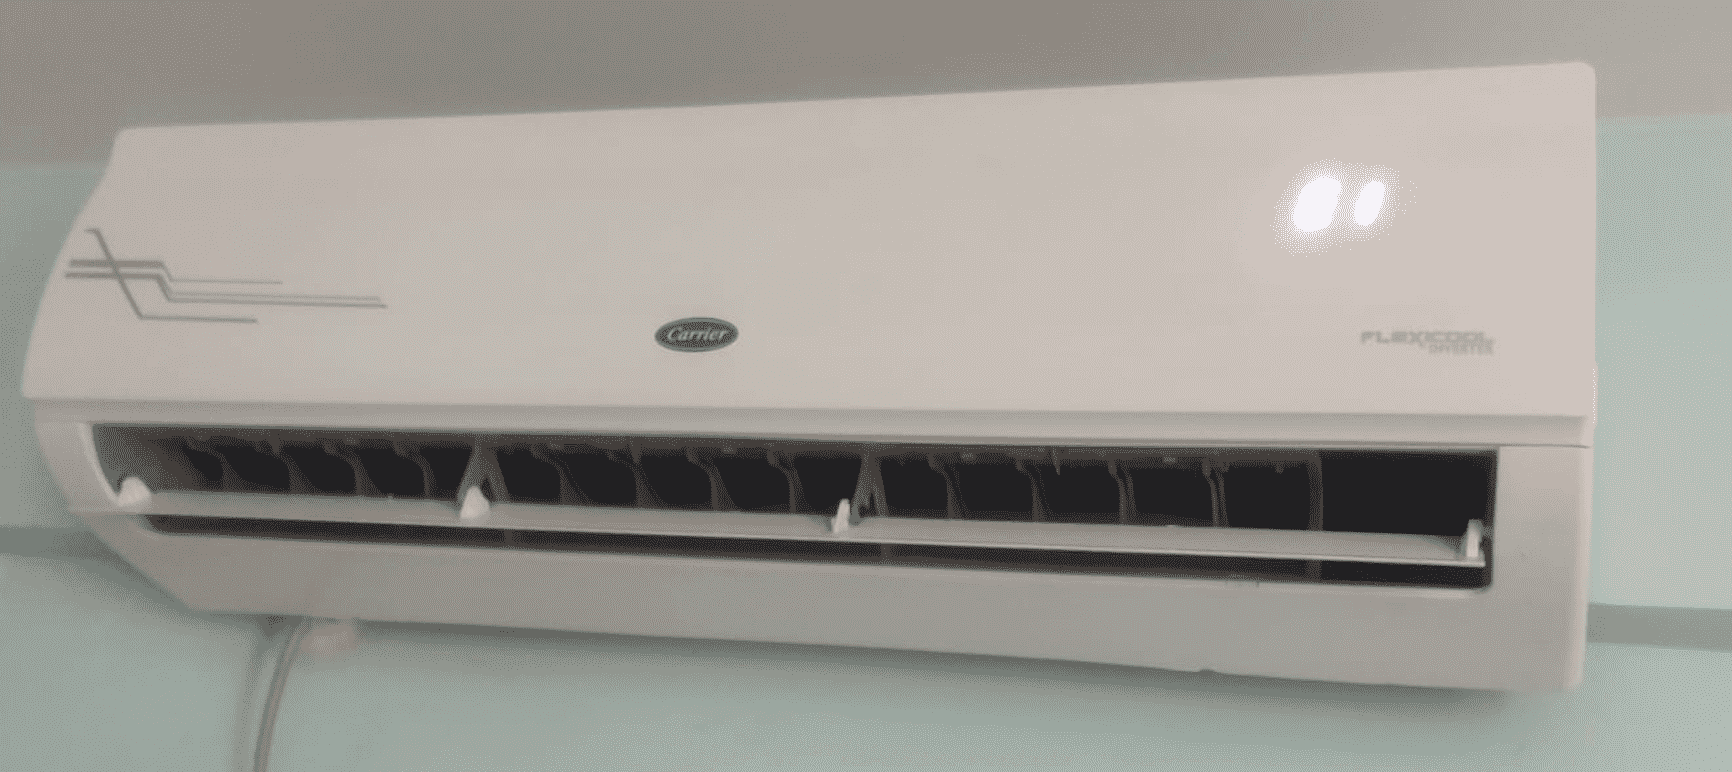 how to cancel timer on Carrier air conditioner